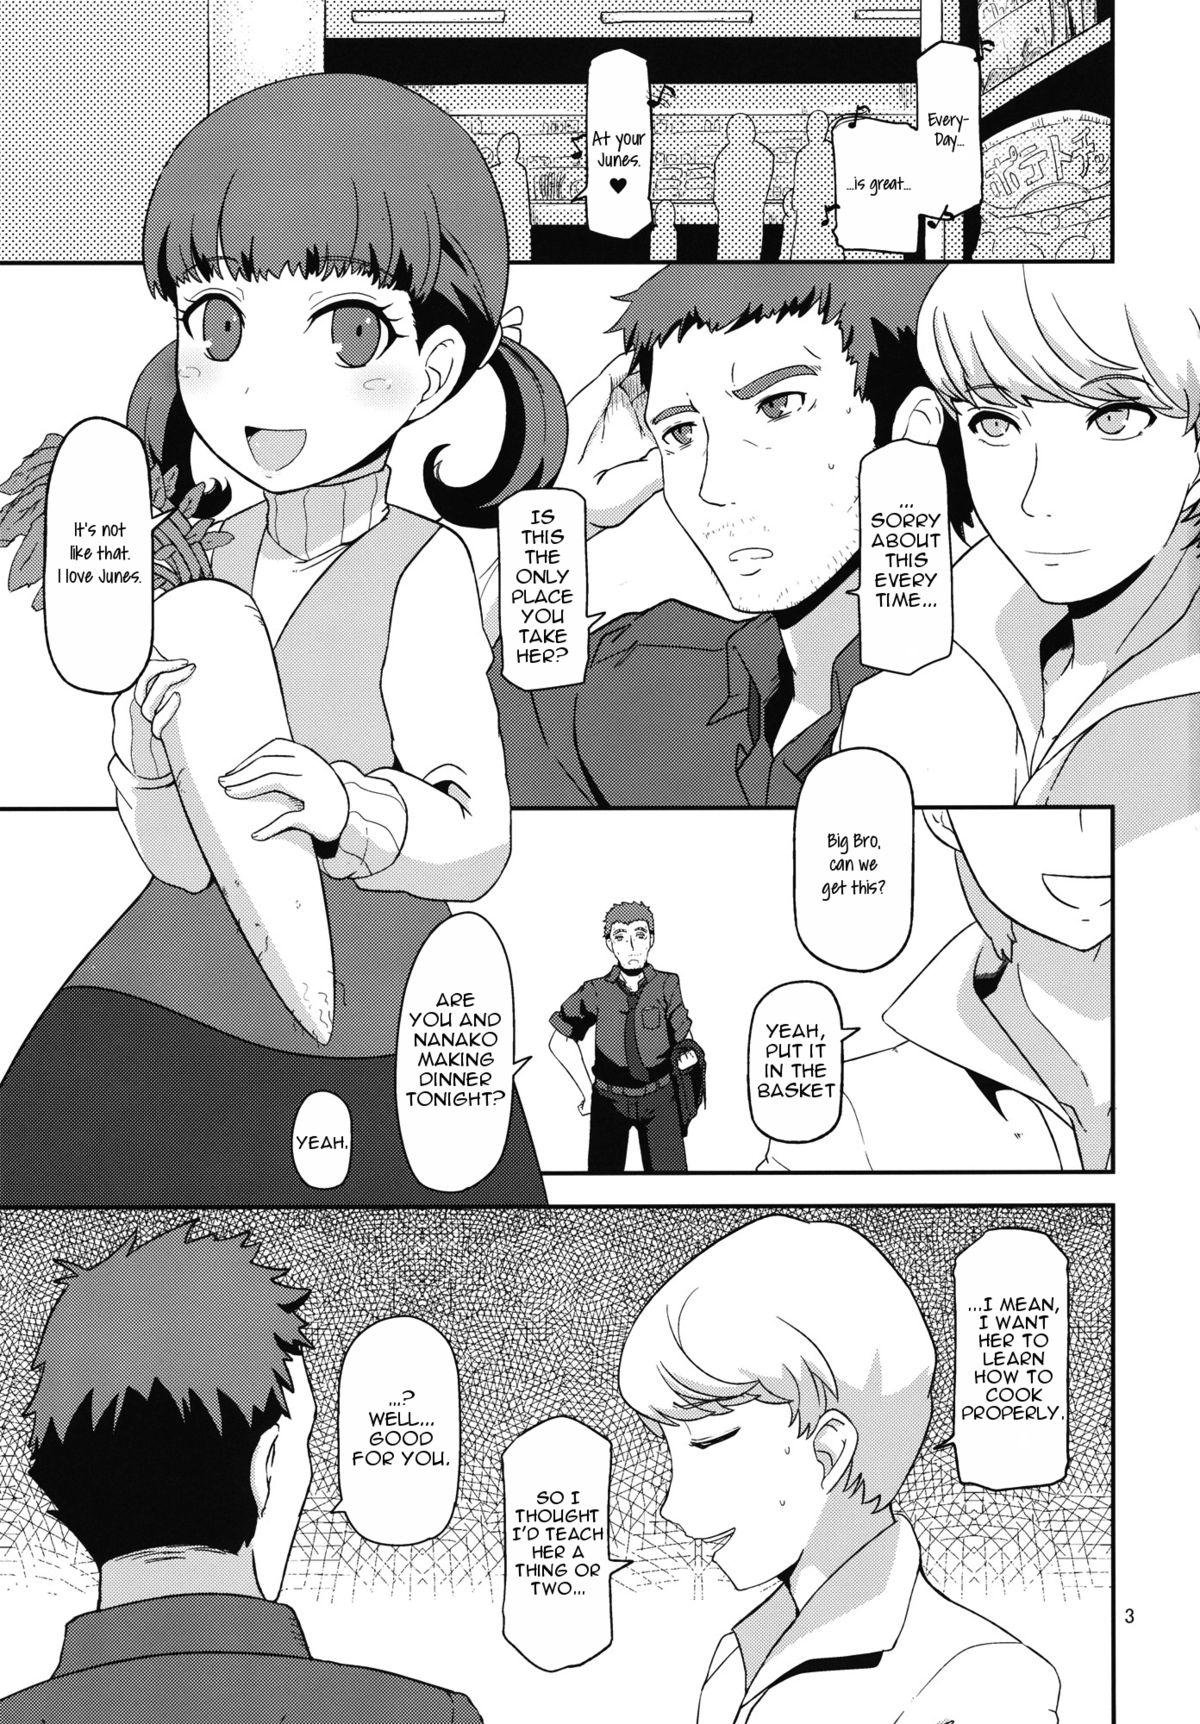 Celebrity Nudes Oyomesan no Narikata | How to Become a Wife - Persona 4 Pay - Page 2